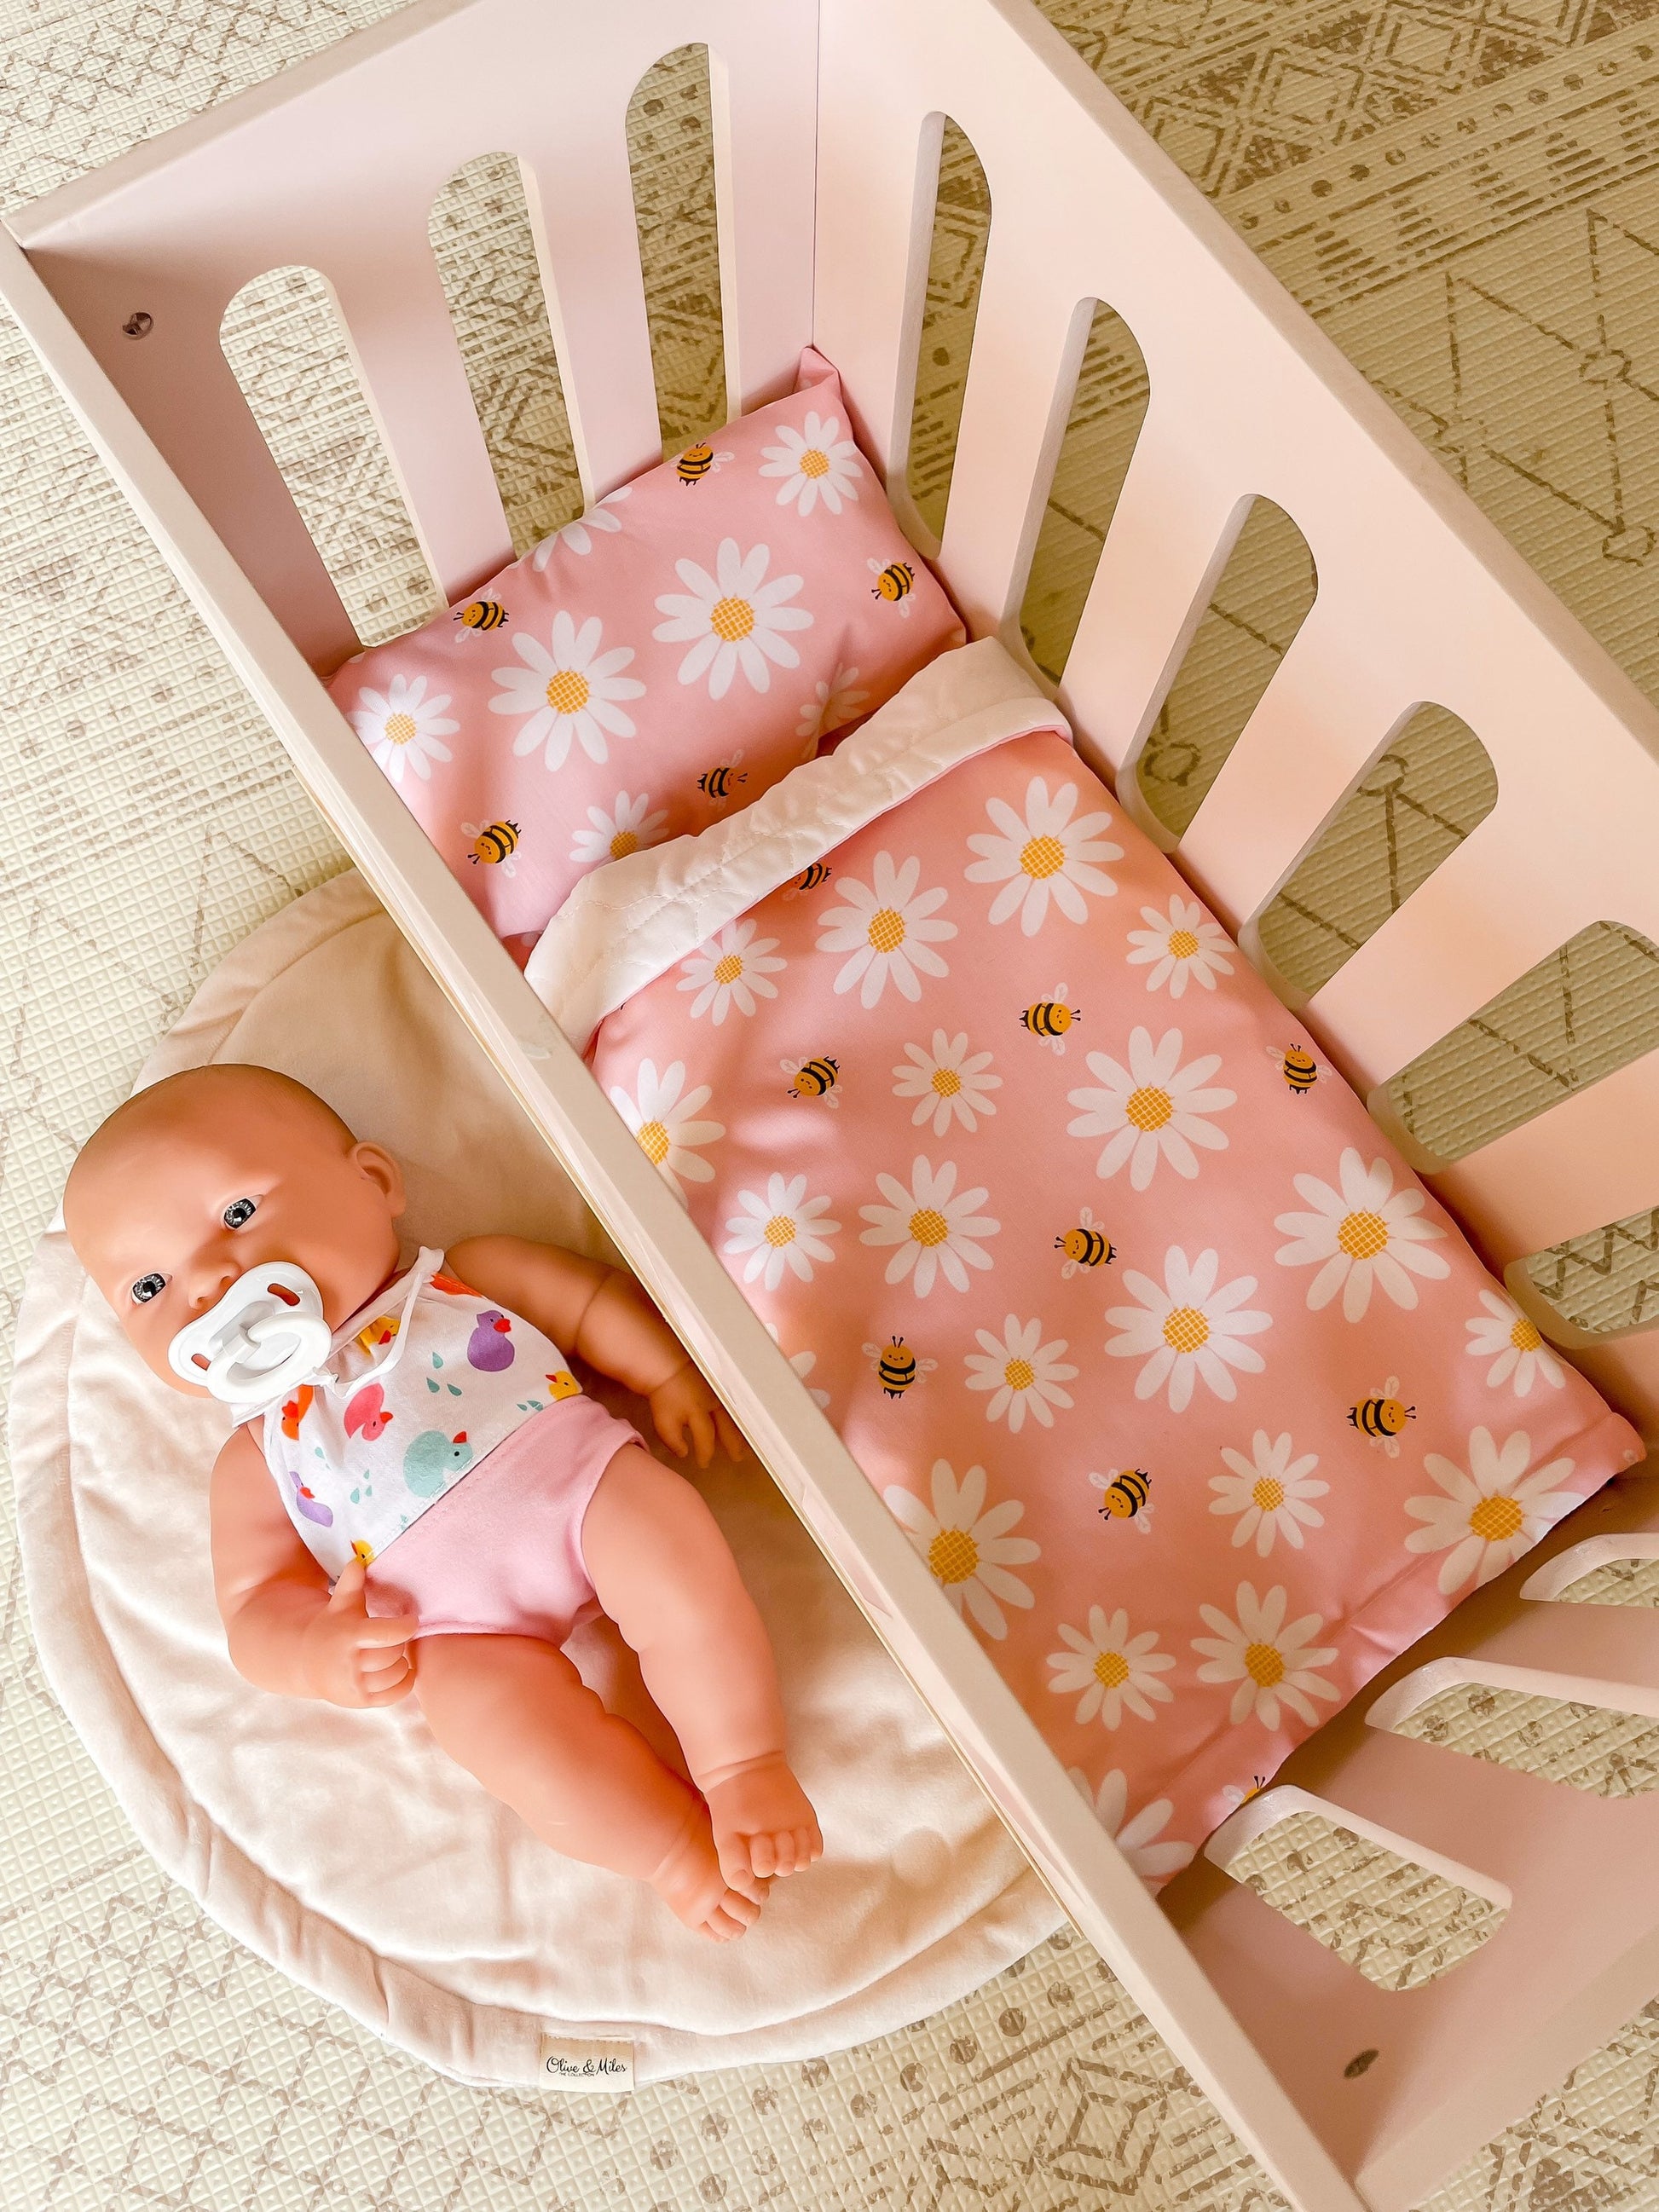 Pink Doll Bedding | Gift for niece | Crib sheet and pillow toy set | Doll Bed Cover Linen | Doll Cot Blanket | Crib Bedding | Pram Pillows